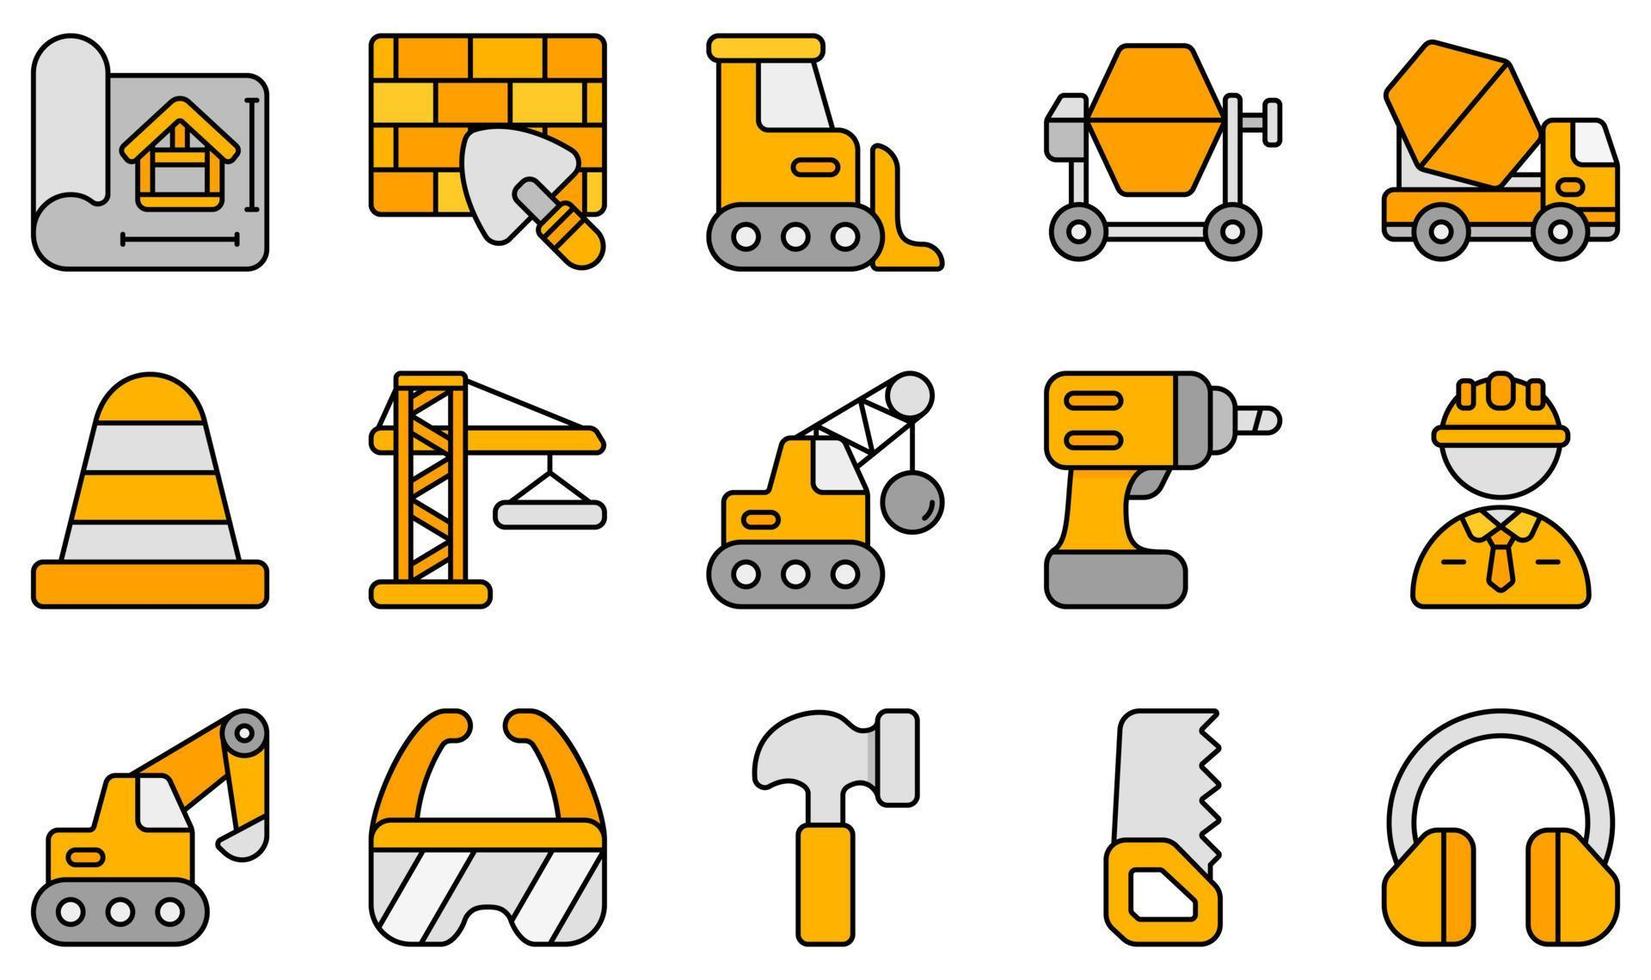 Set of Vector Icons Related to Construction. Contains such Icons as Blueprint, Brickwall, Bulldozer, Crane, Engineer, Excavator and more.